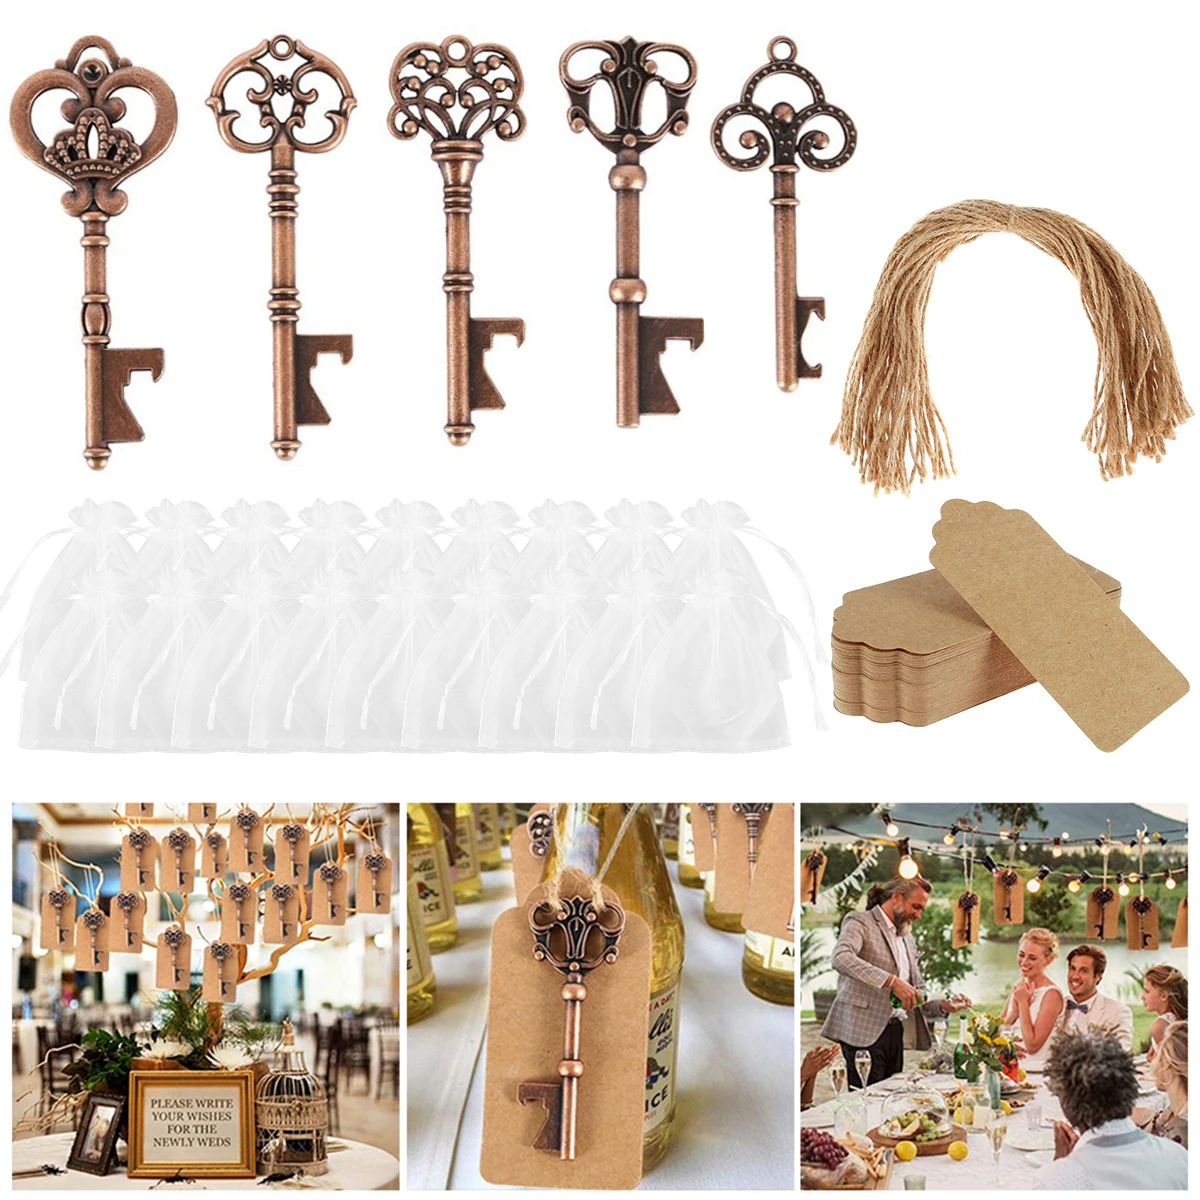 30pcs Key Bottle Opener Kit Wedding Party Favor Vintage Key Bottle Opener with Paperboard Tag Card Wedding Souvenirs Party Gifts